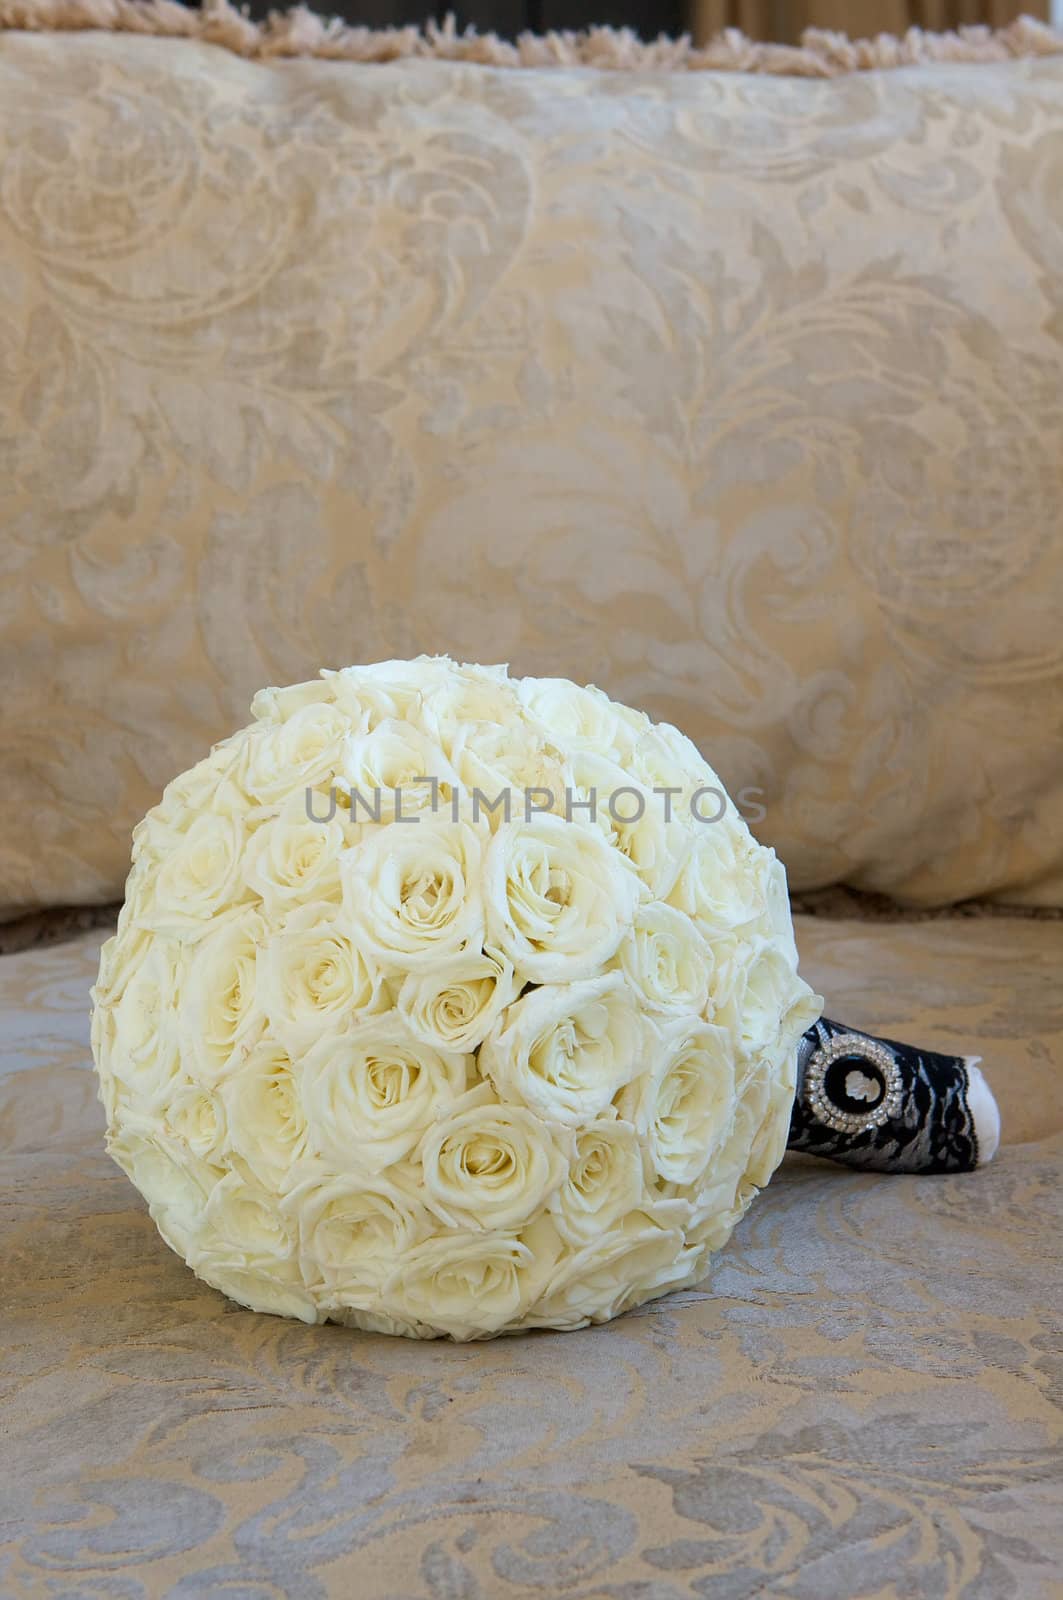 A bridal bouquet of flowers made with cream colored roses by Deimages